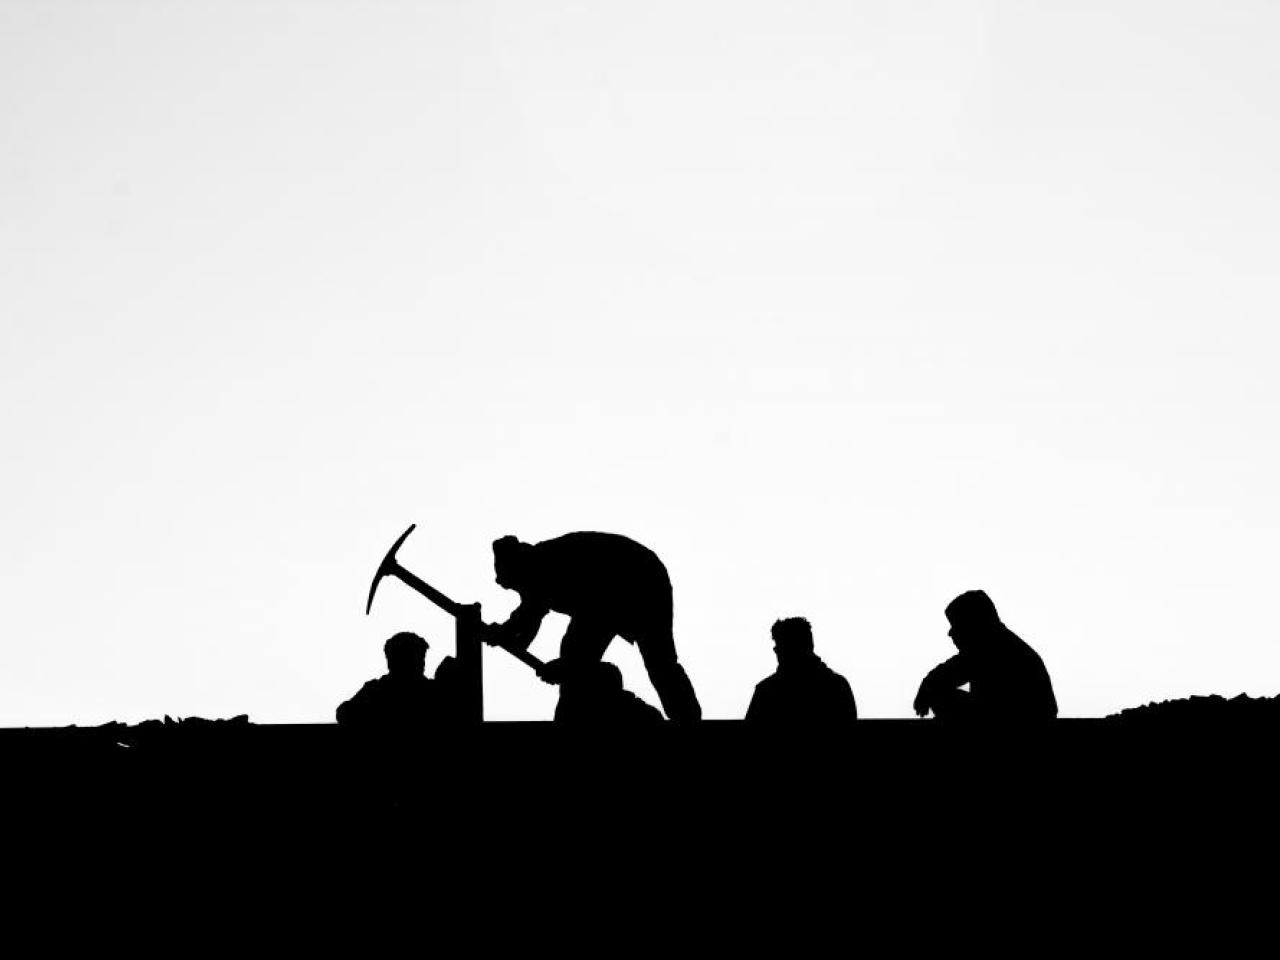 Black and white photo of five people silhouetted, with one holding a pick axe.